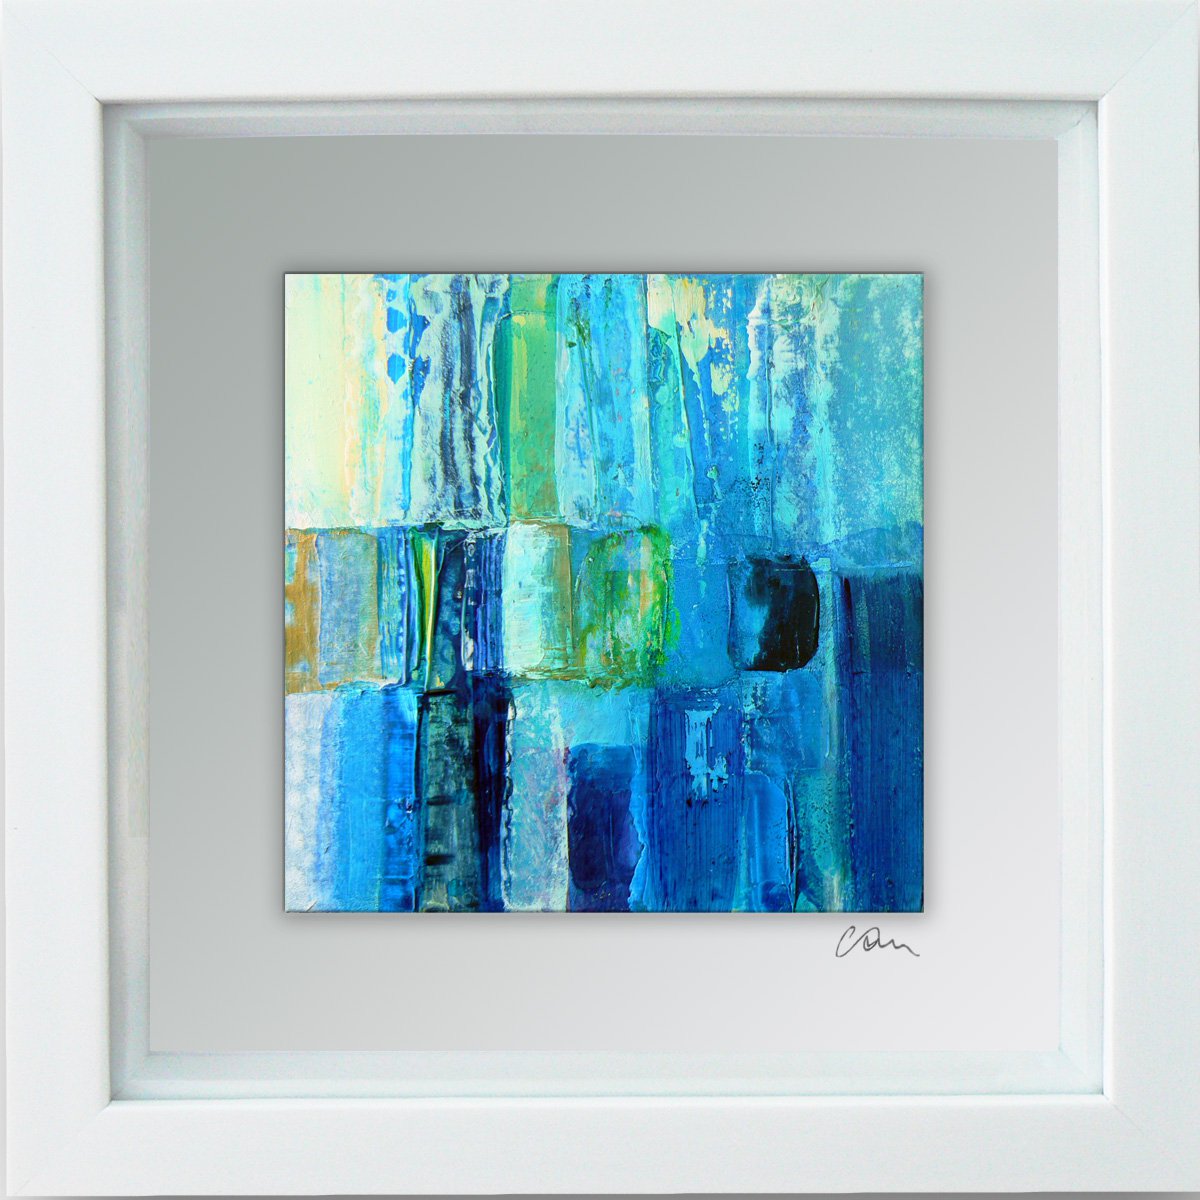 Framed ready to hang original abstract - Deep water #19 by Carolynne Coulson